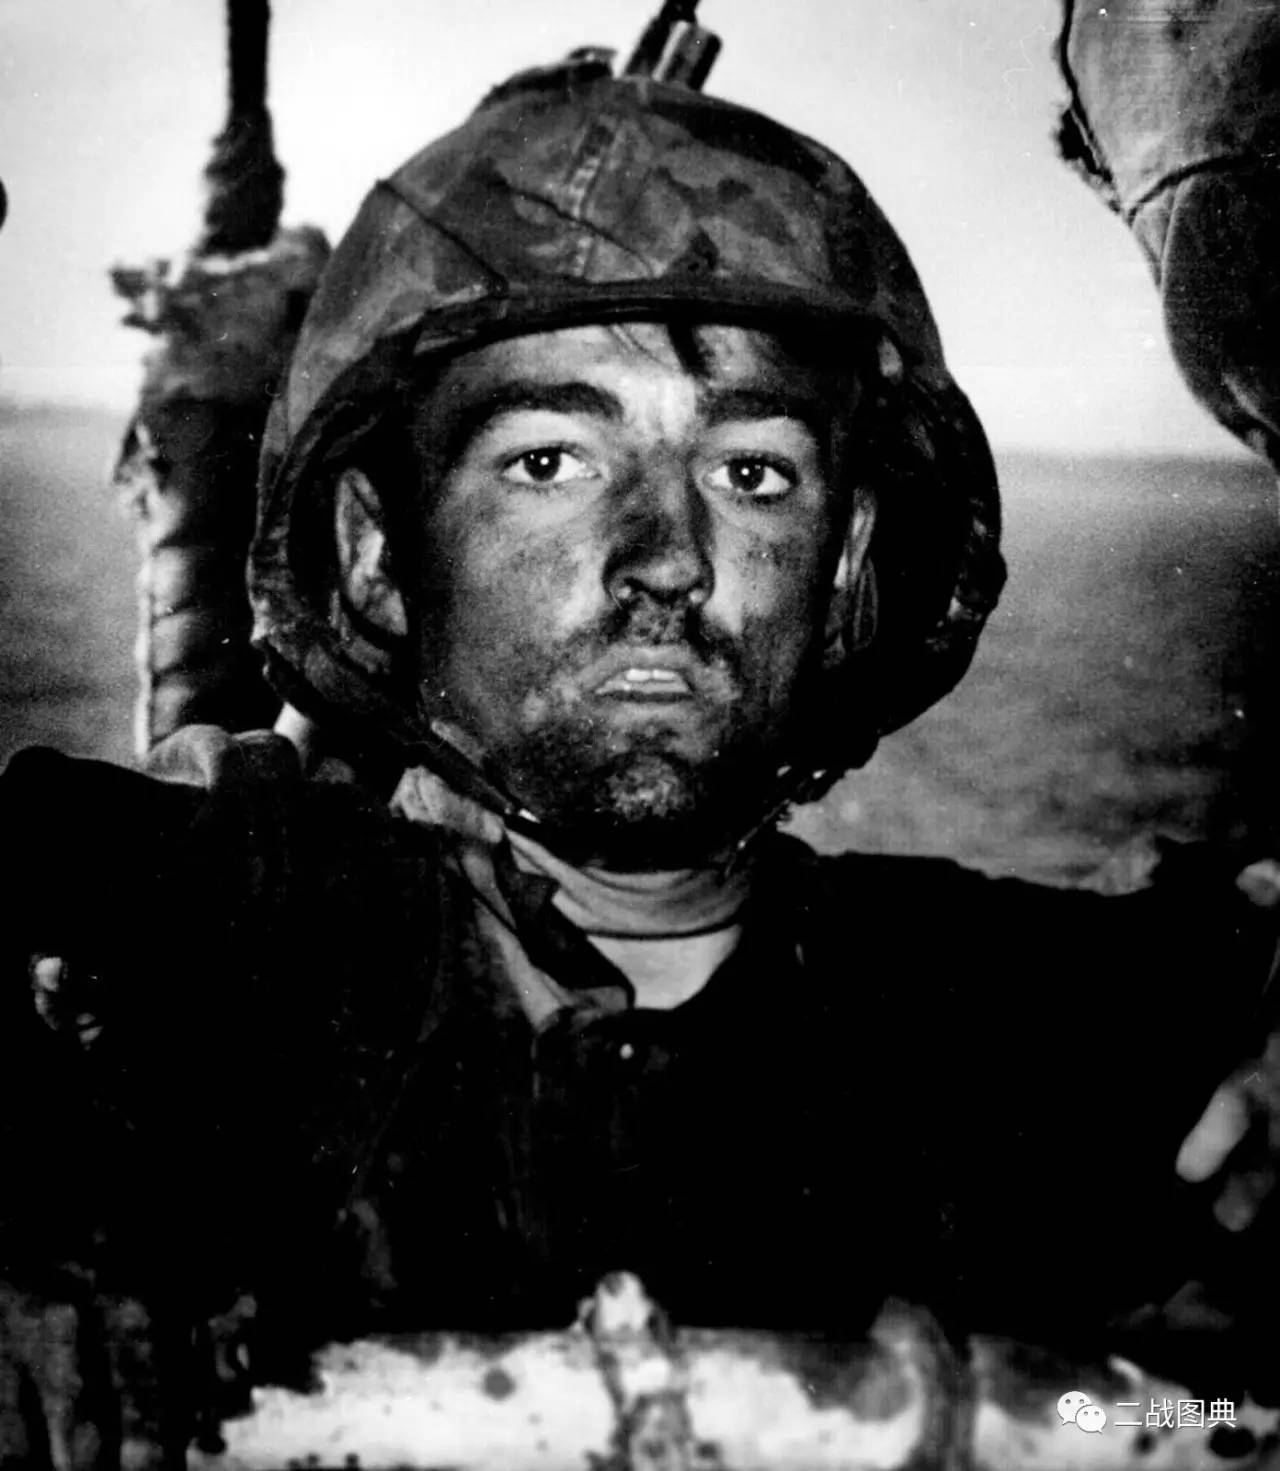 An exhausted U.S. Marine exhibits the thousand-yard stare after two days of constant fighting at the Battle of Eniwetok, February 1944.